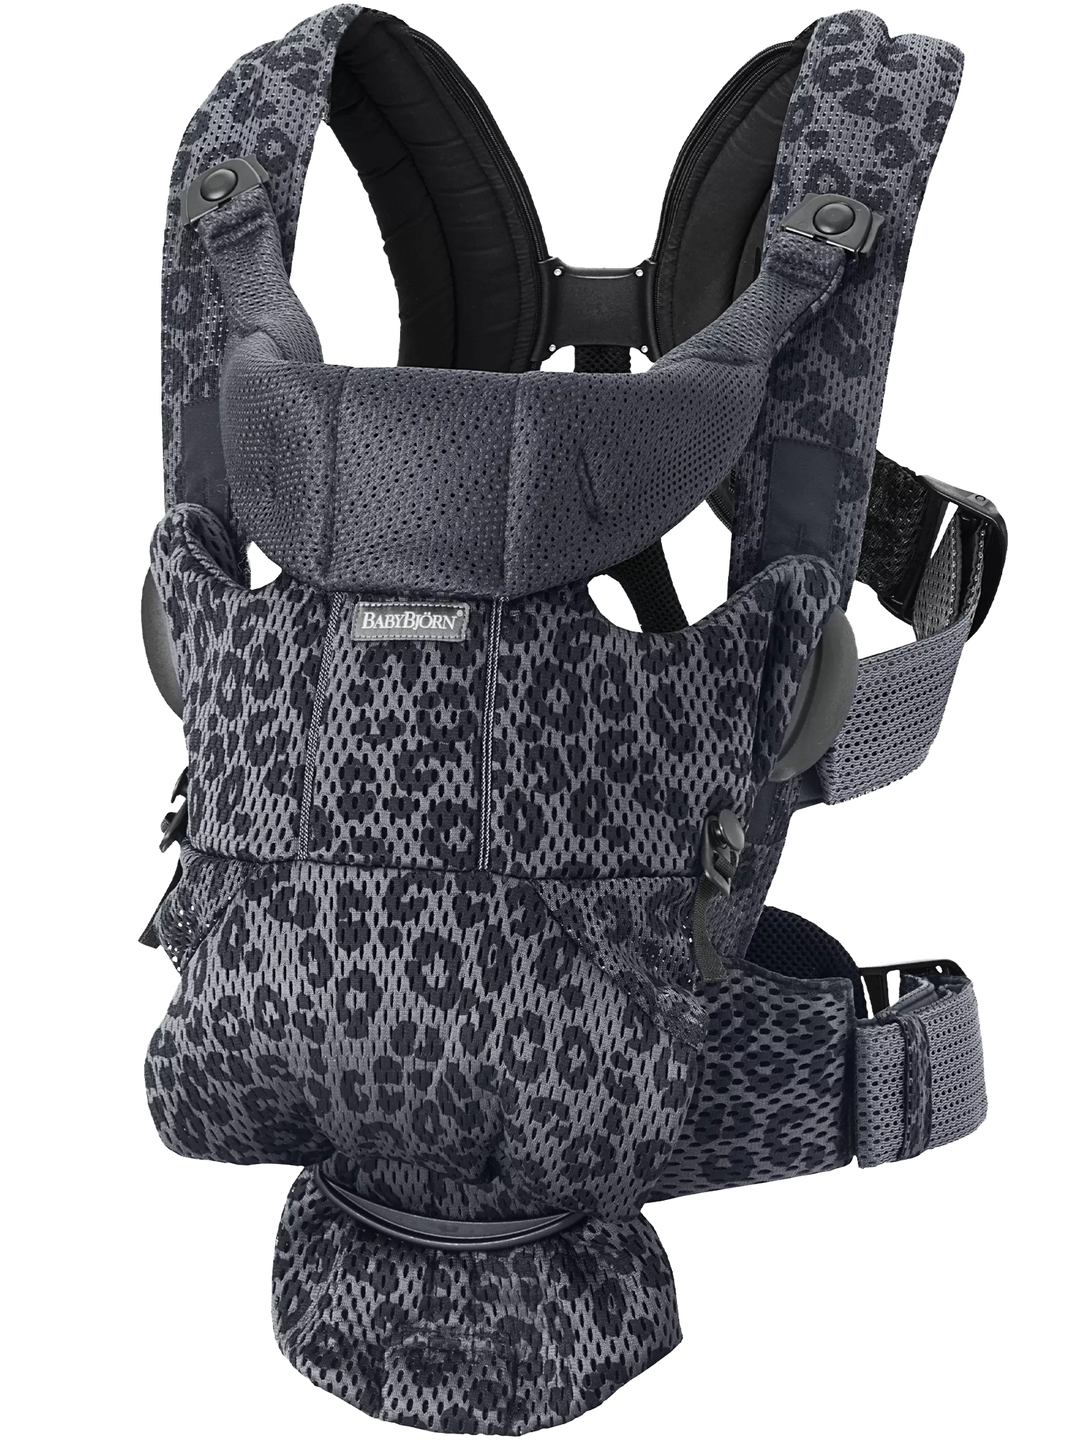 Baby Carrier Free - 3D Mesh